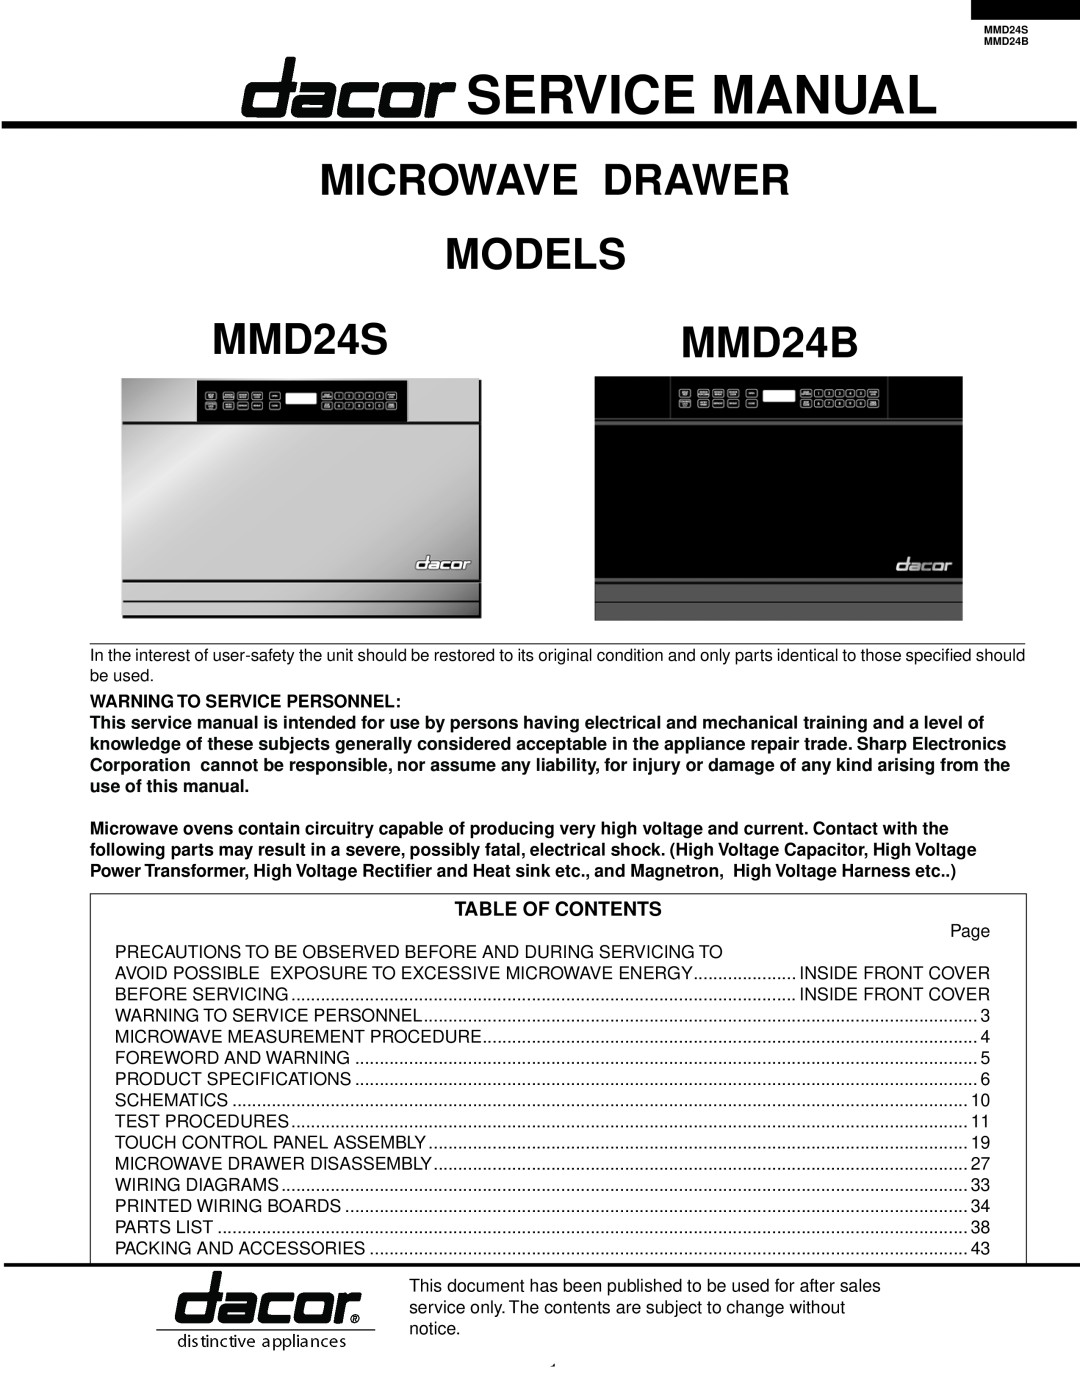 Sharp manual Table Of Contents, Service Manual, MICROWAVE DRAWER MODELS MMD24SMMD24B, S38M289MMD24S, Before Servicing 